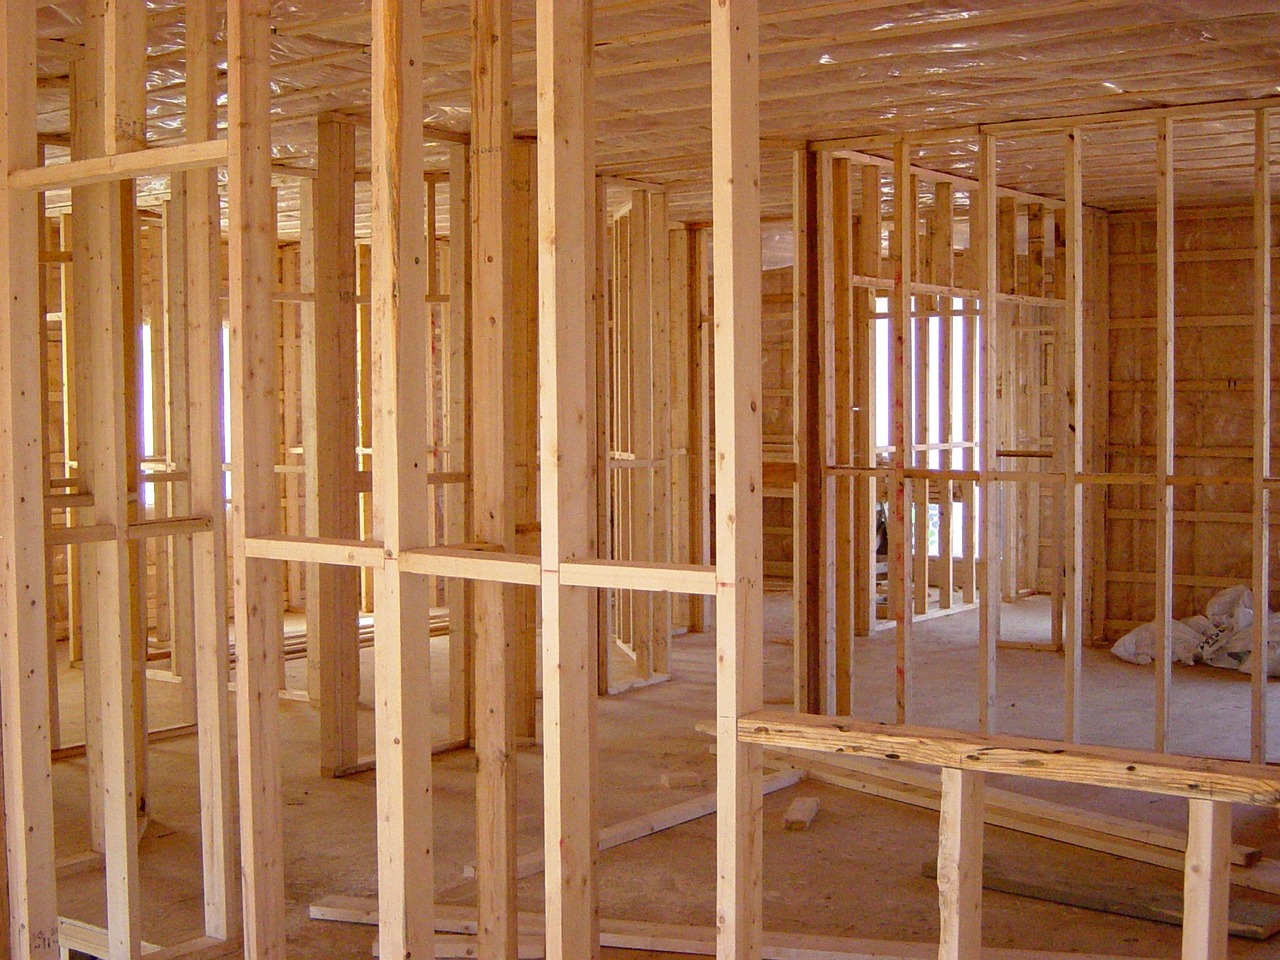 Framing Contractor Insurance – What Types Do I Need?